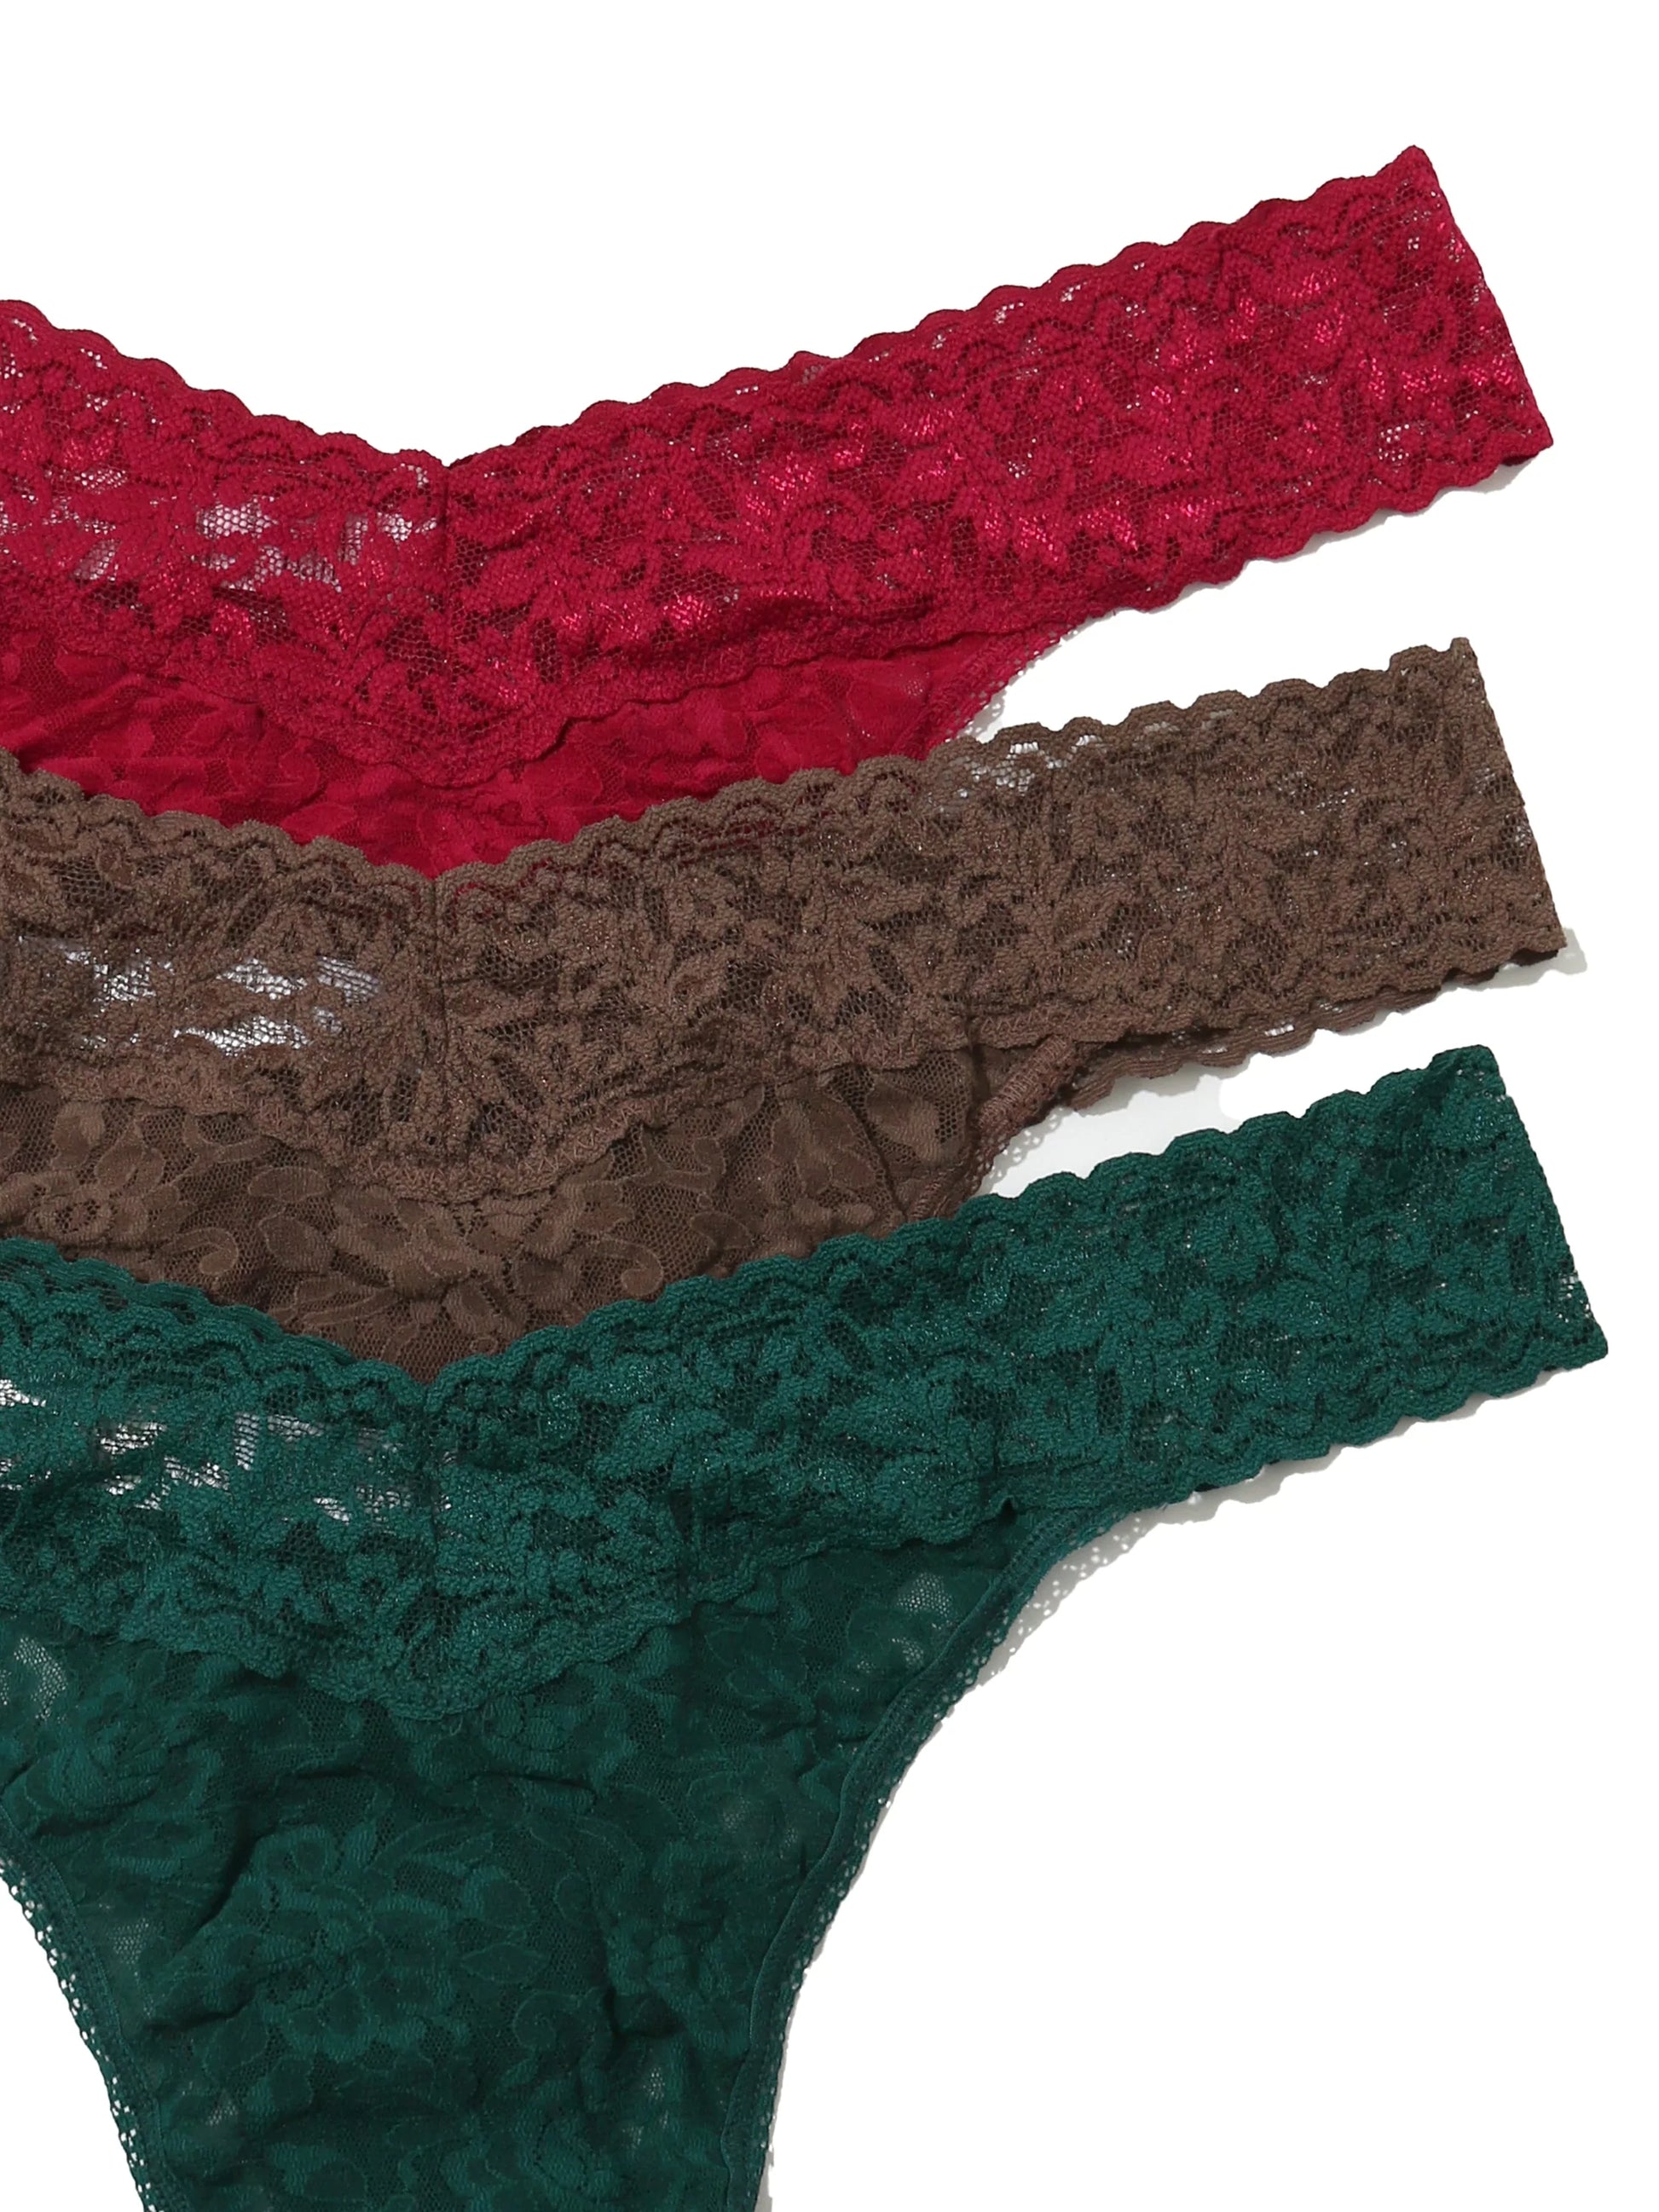 Hanky Panky Signature Lace Low Rise Thong - Women's